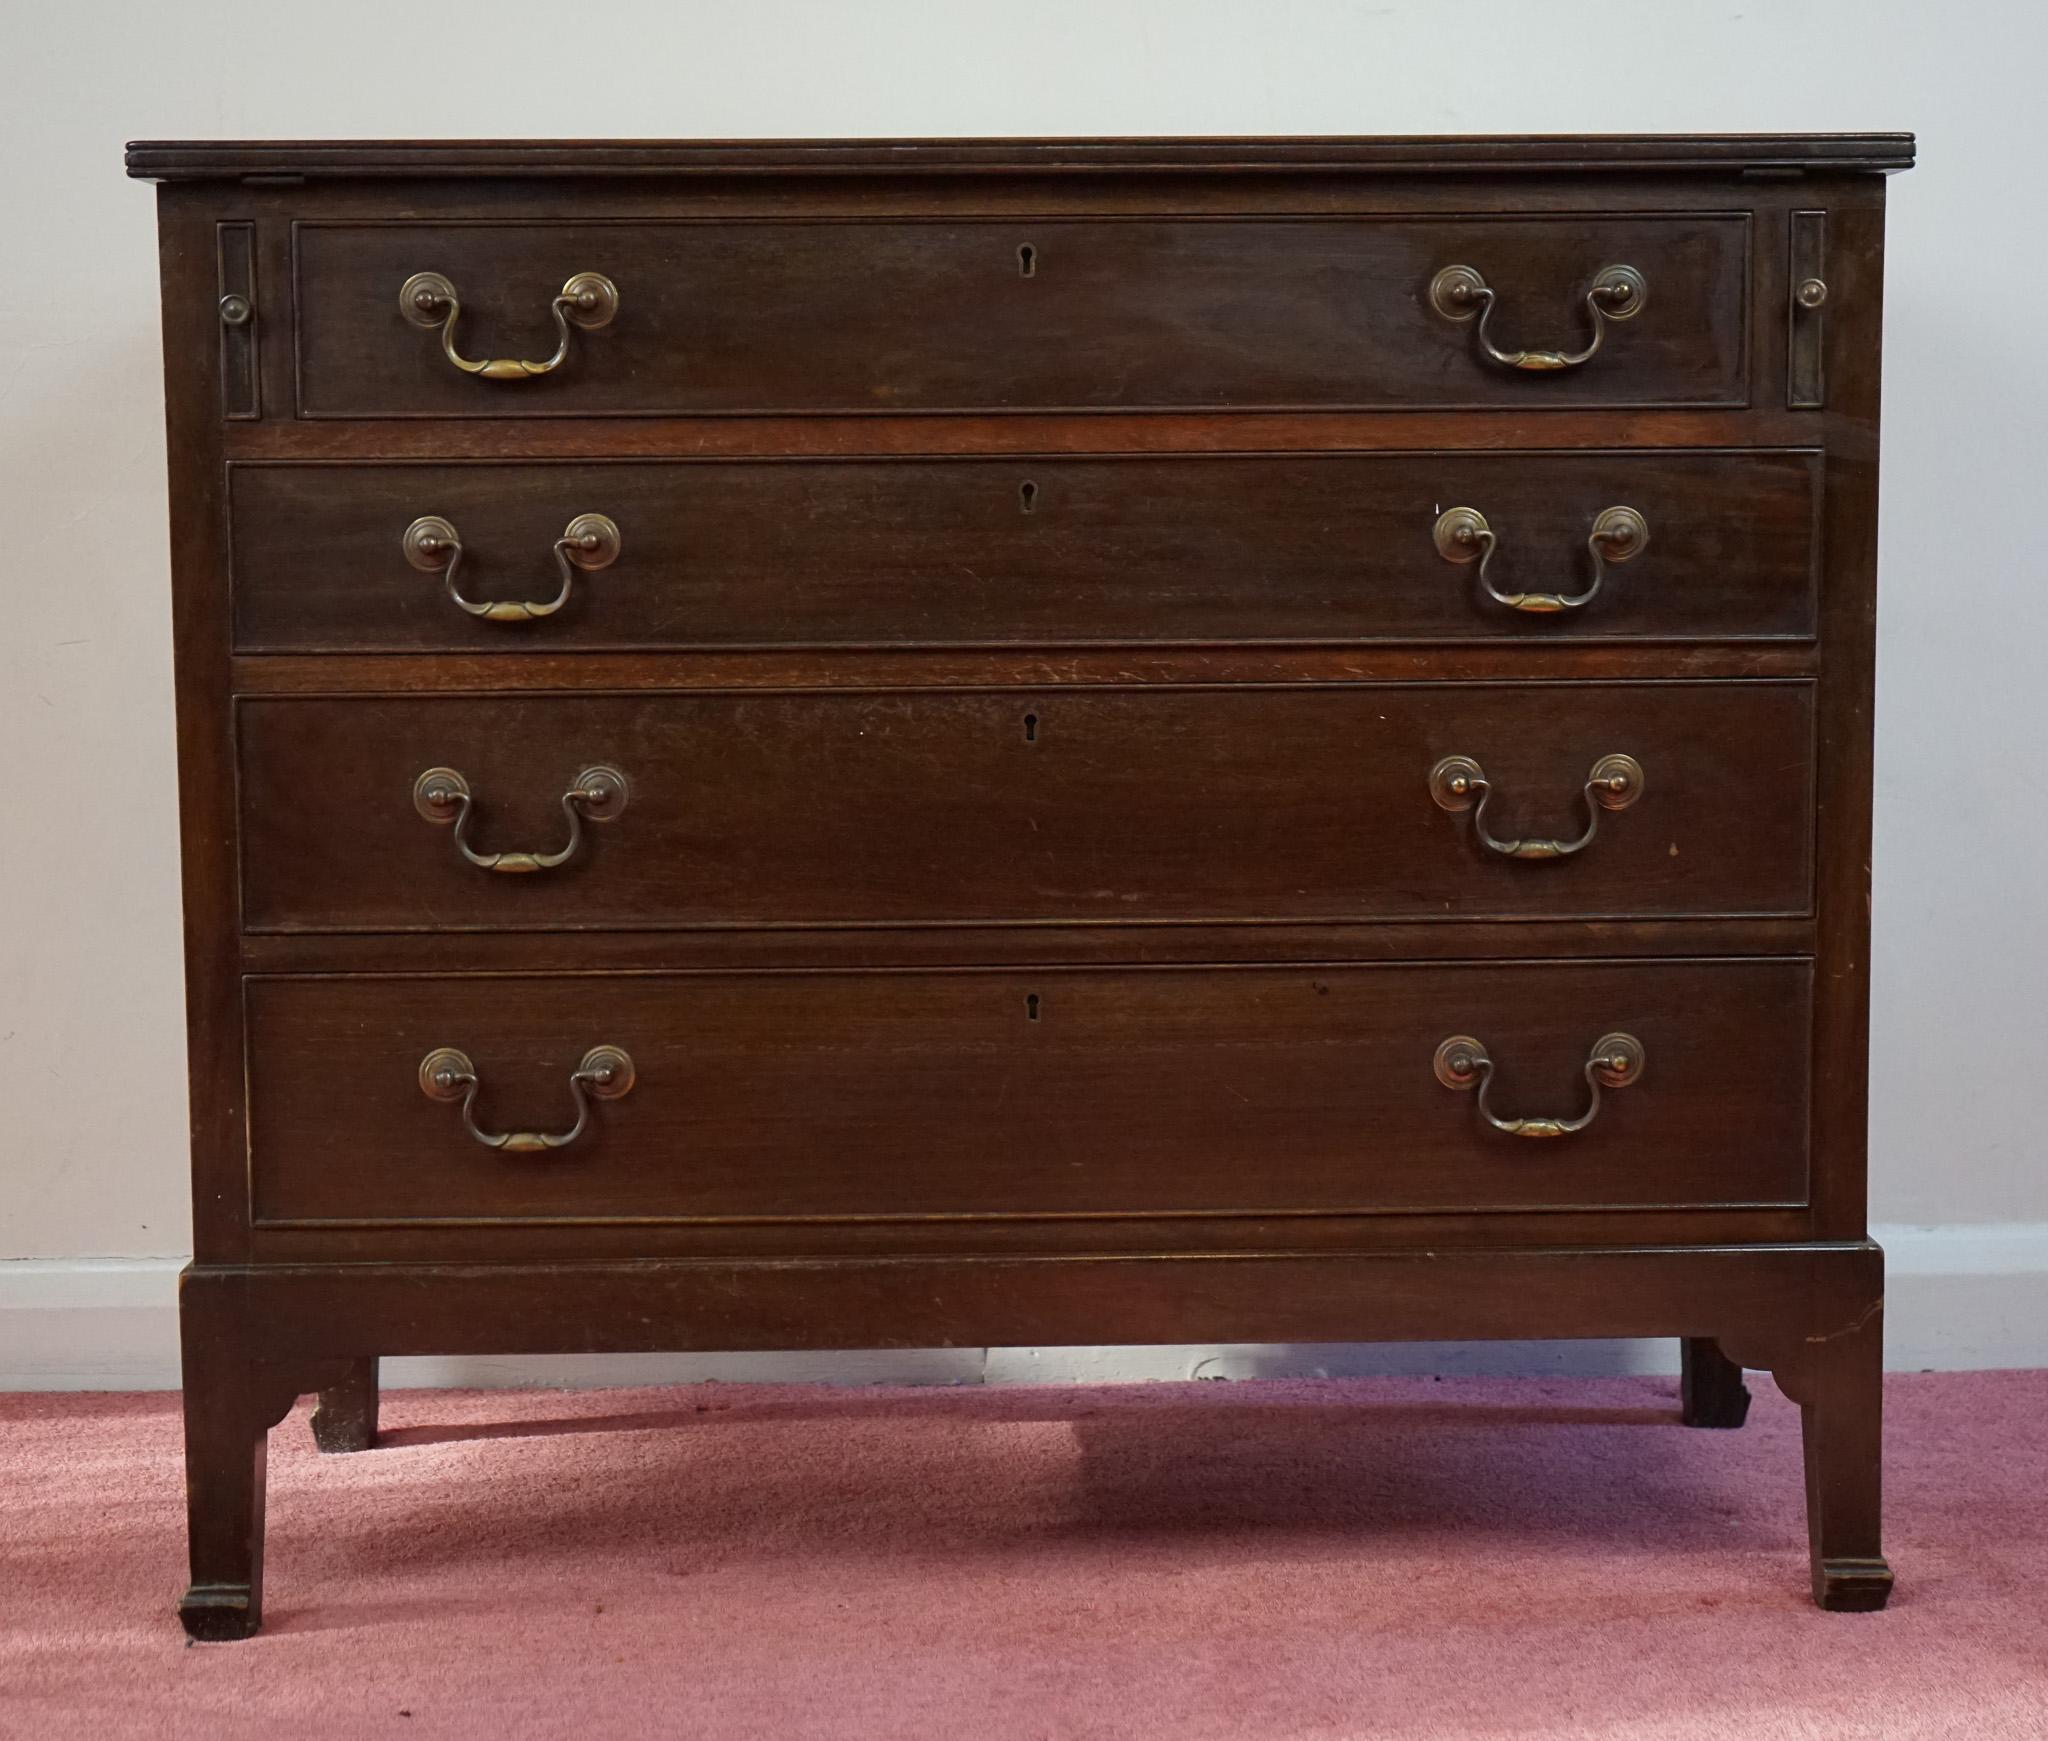 British Beautiful Antique Victorian Chest of Drawers